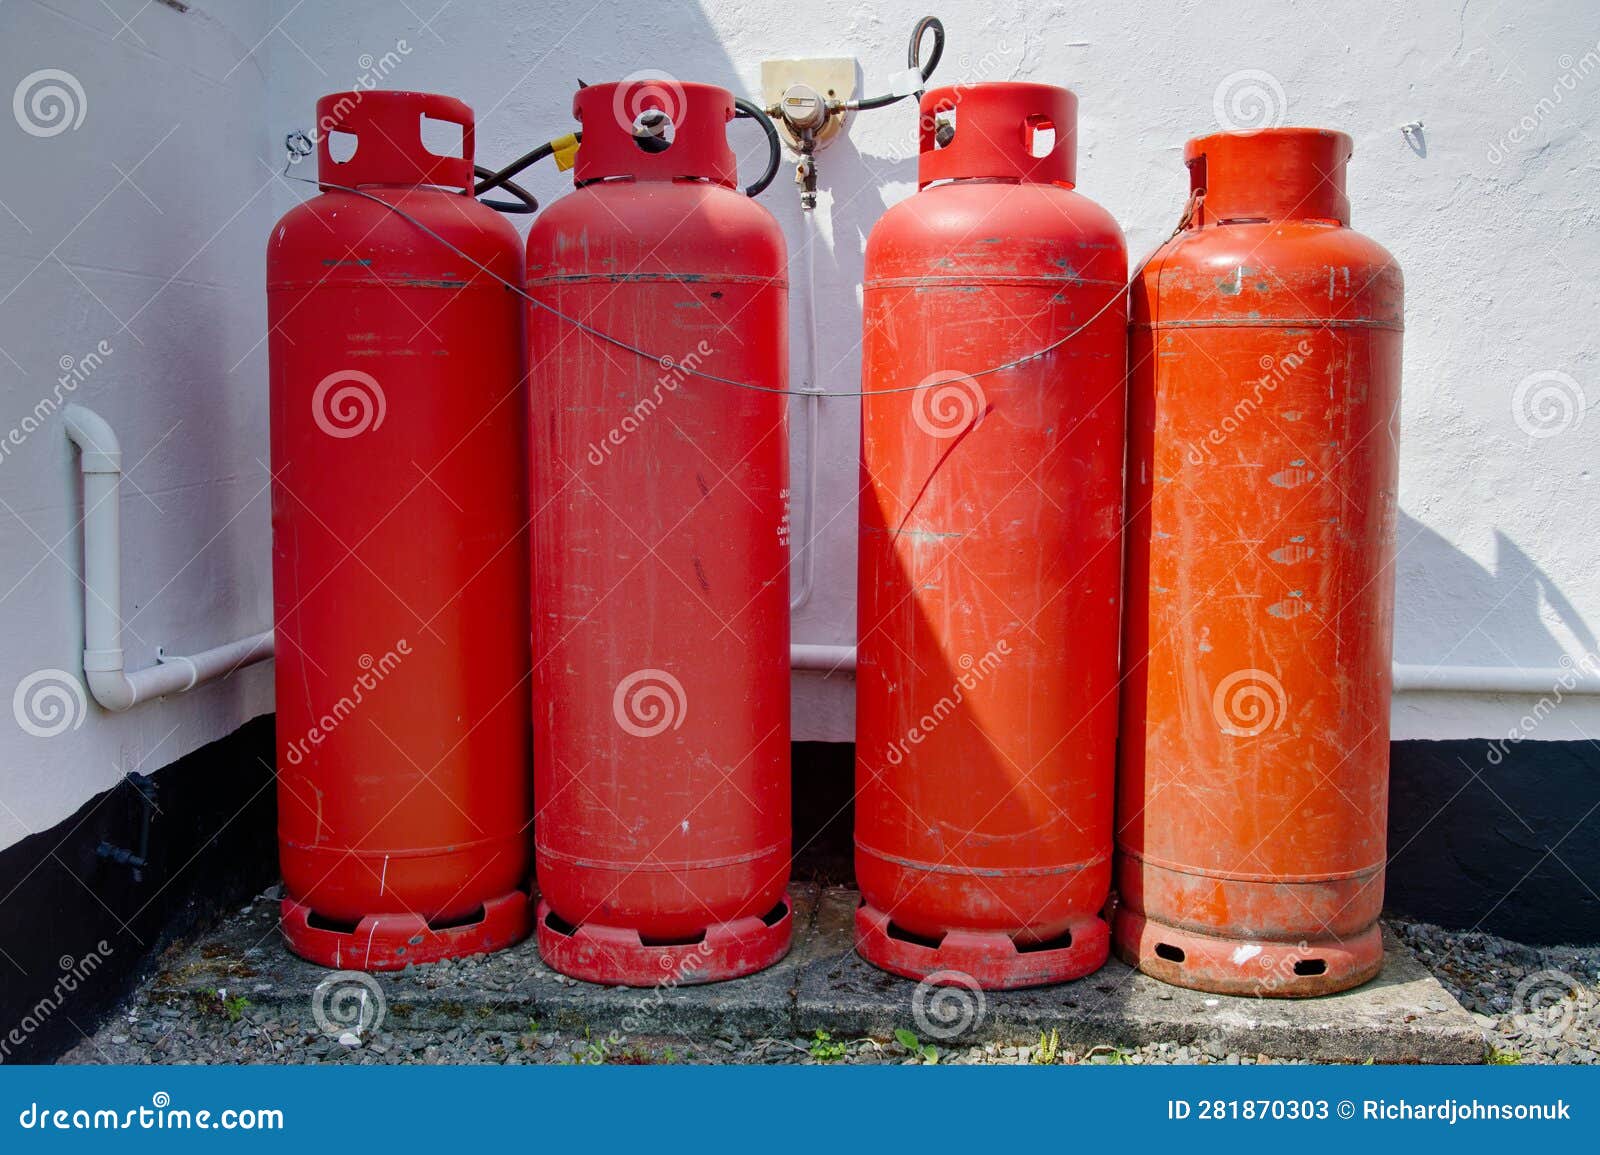 highly flammable gas propane cylinders at caravan park